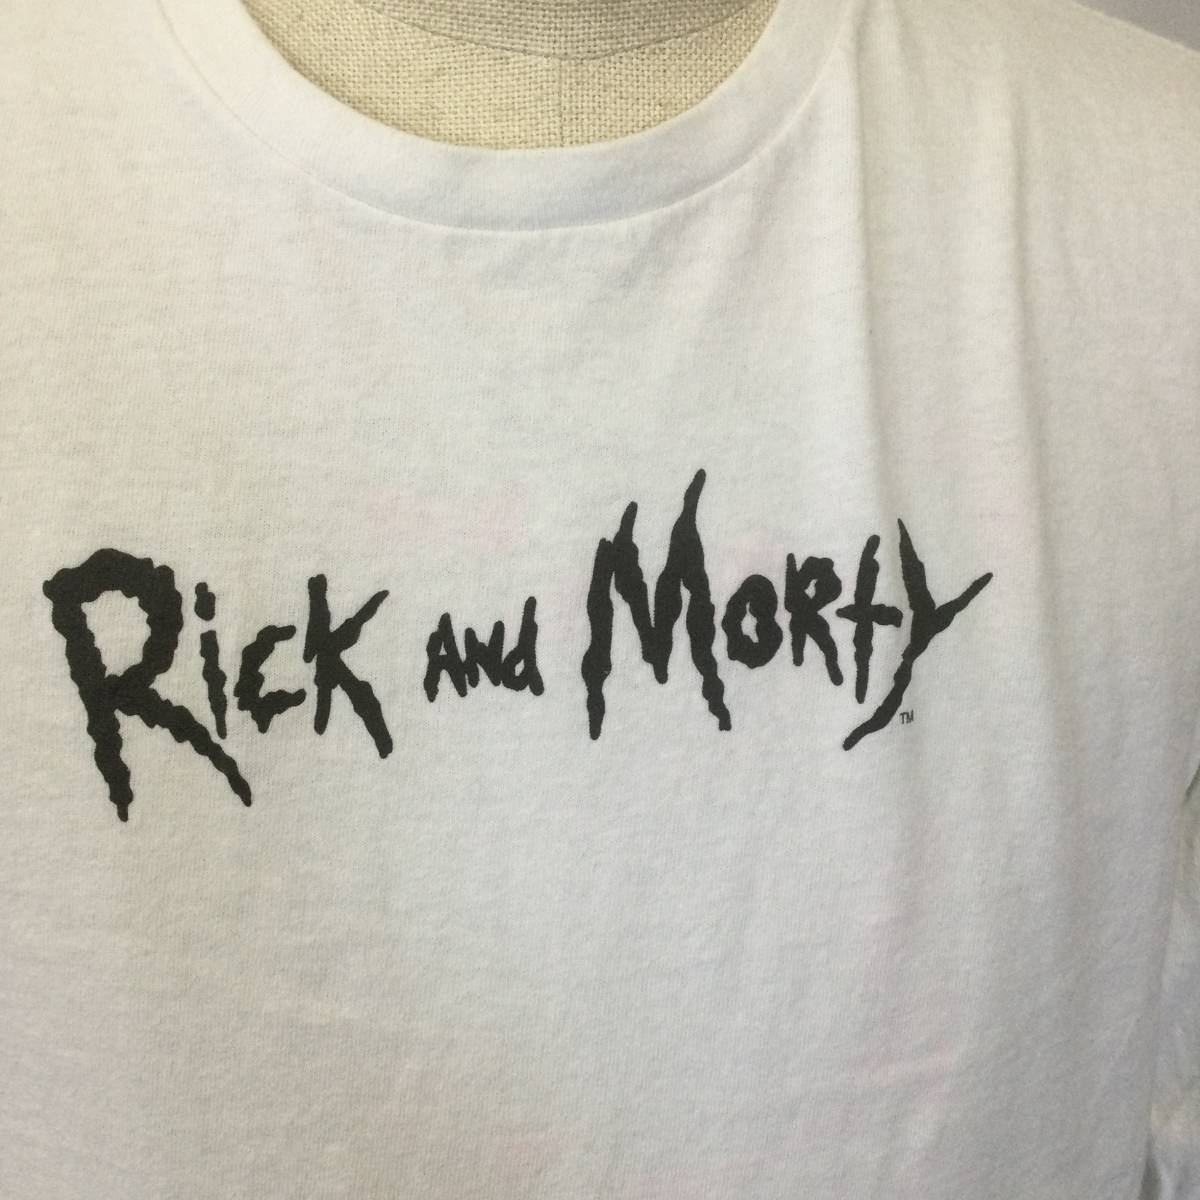 【N757】★Rick AND MoRty★ リックアンドモーティ ロングスリーブ プリントTシャツ XLサイズ アニメT キャラT アメリカ古着 古着 古着卸_画像3